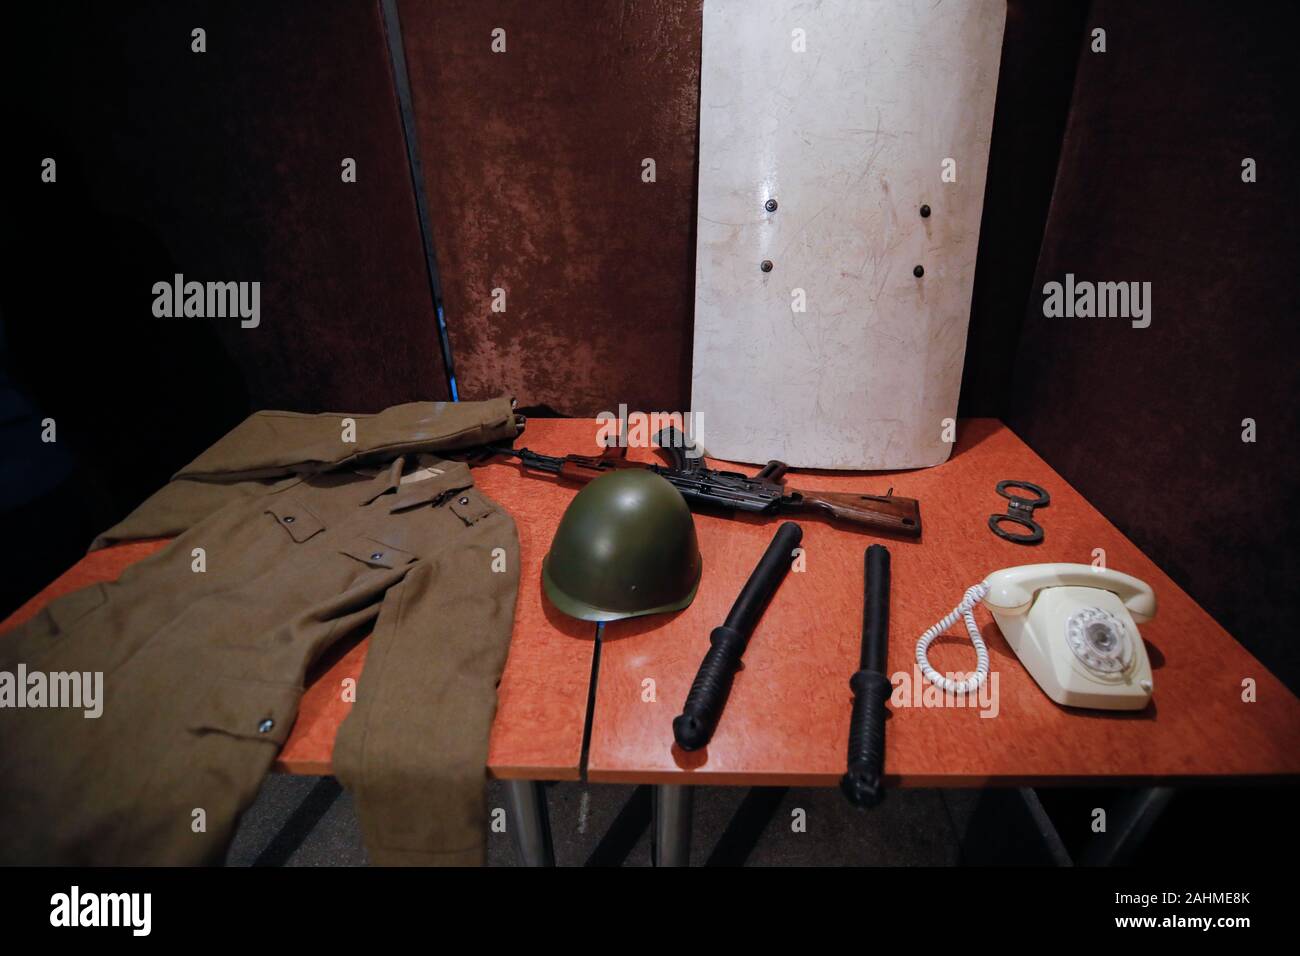 Kit of a guardian in the Romanian Securitate dungeons, where the political prisoners were held captive, from the former communist Romania, in Buchares Stock Photo